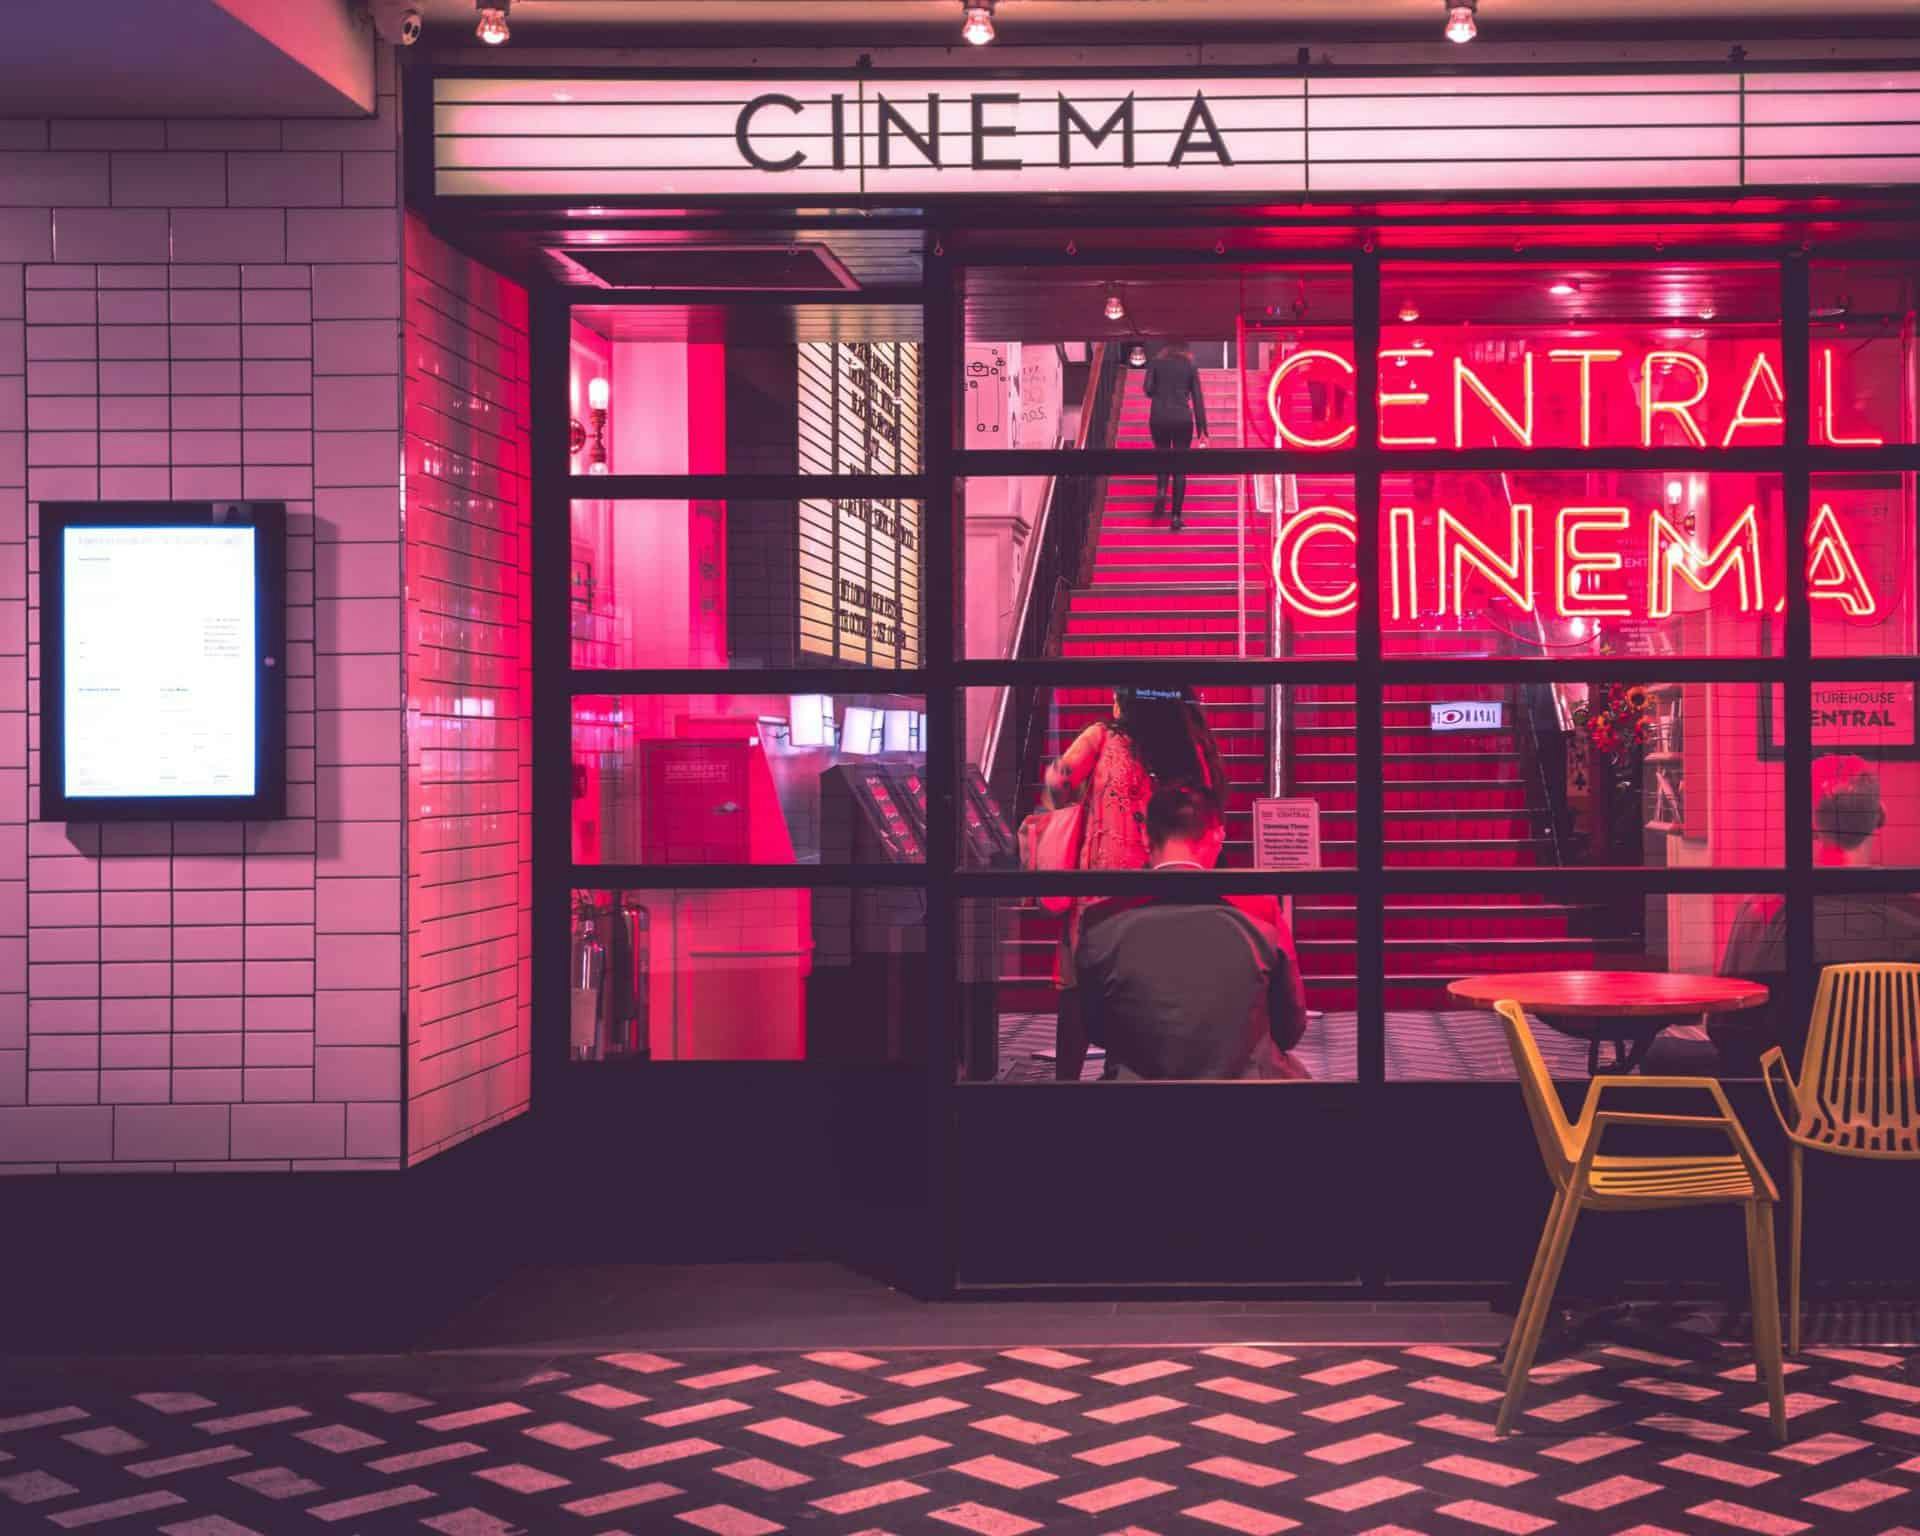 photo of a theater with a central cinema neon light